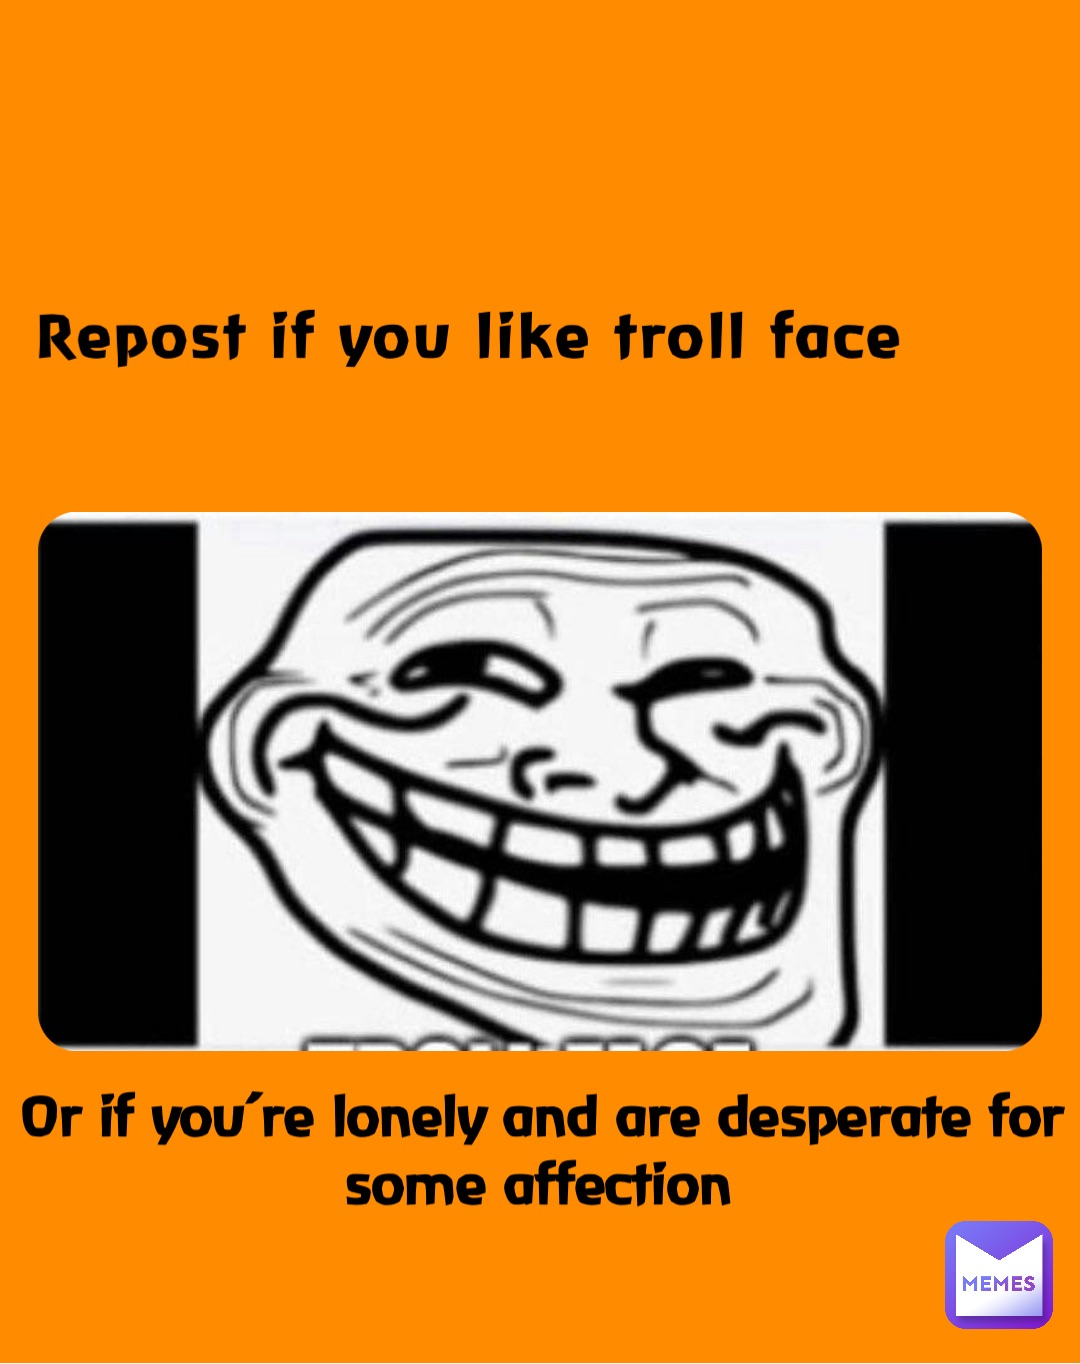 Repost if you like troll face Or if you’re lonely and are desperate for some affection